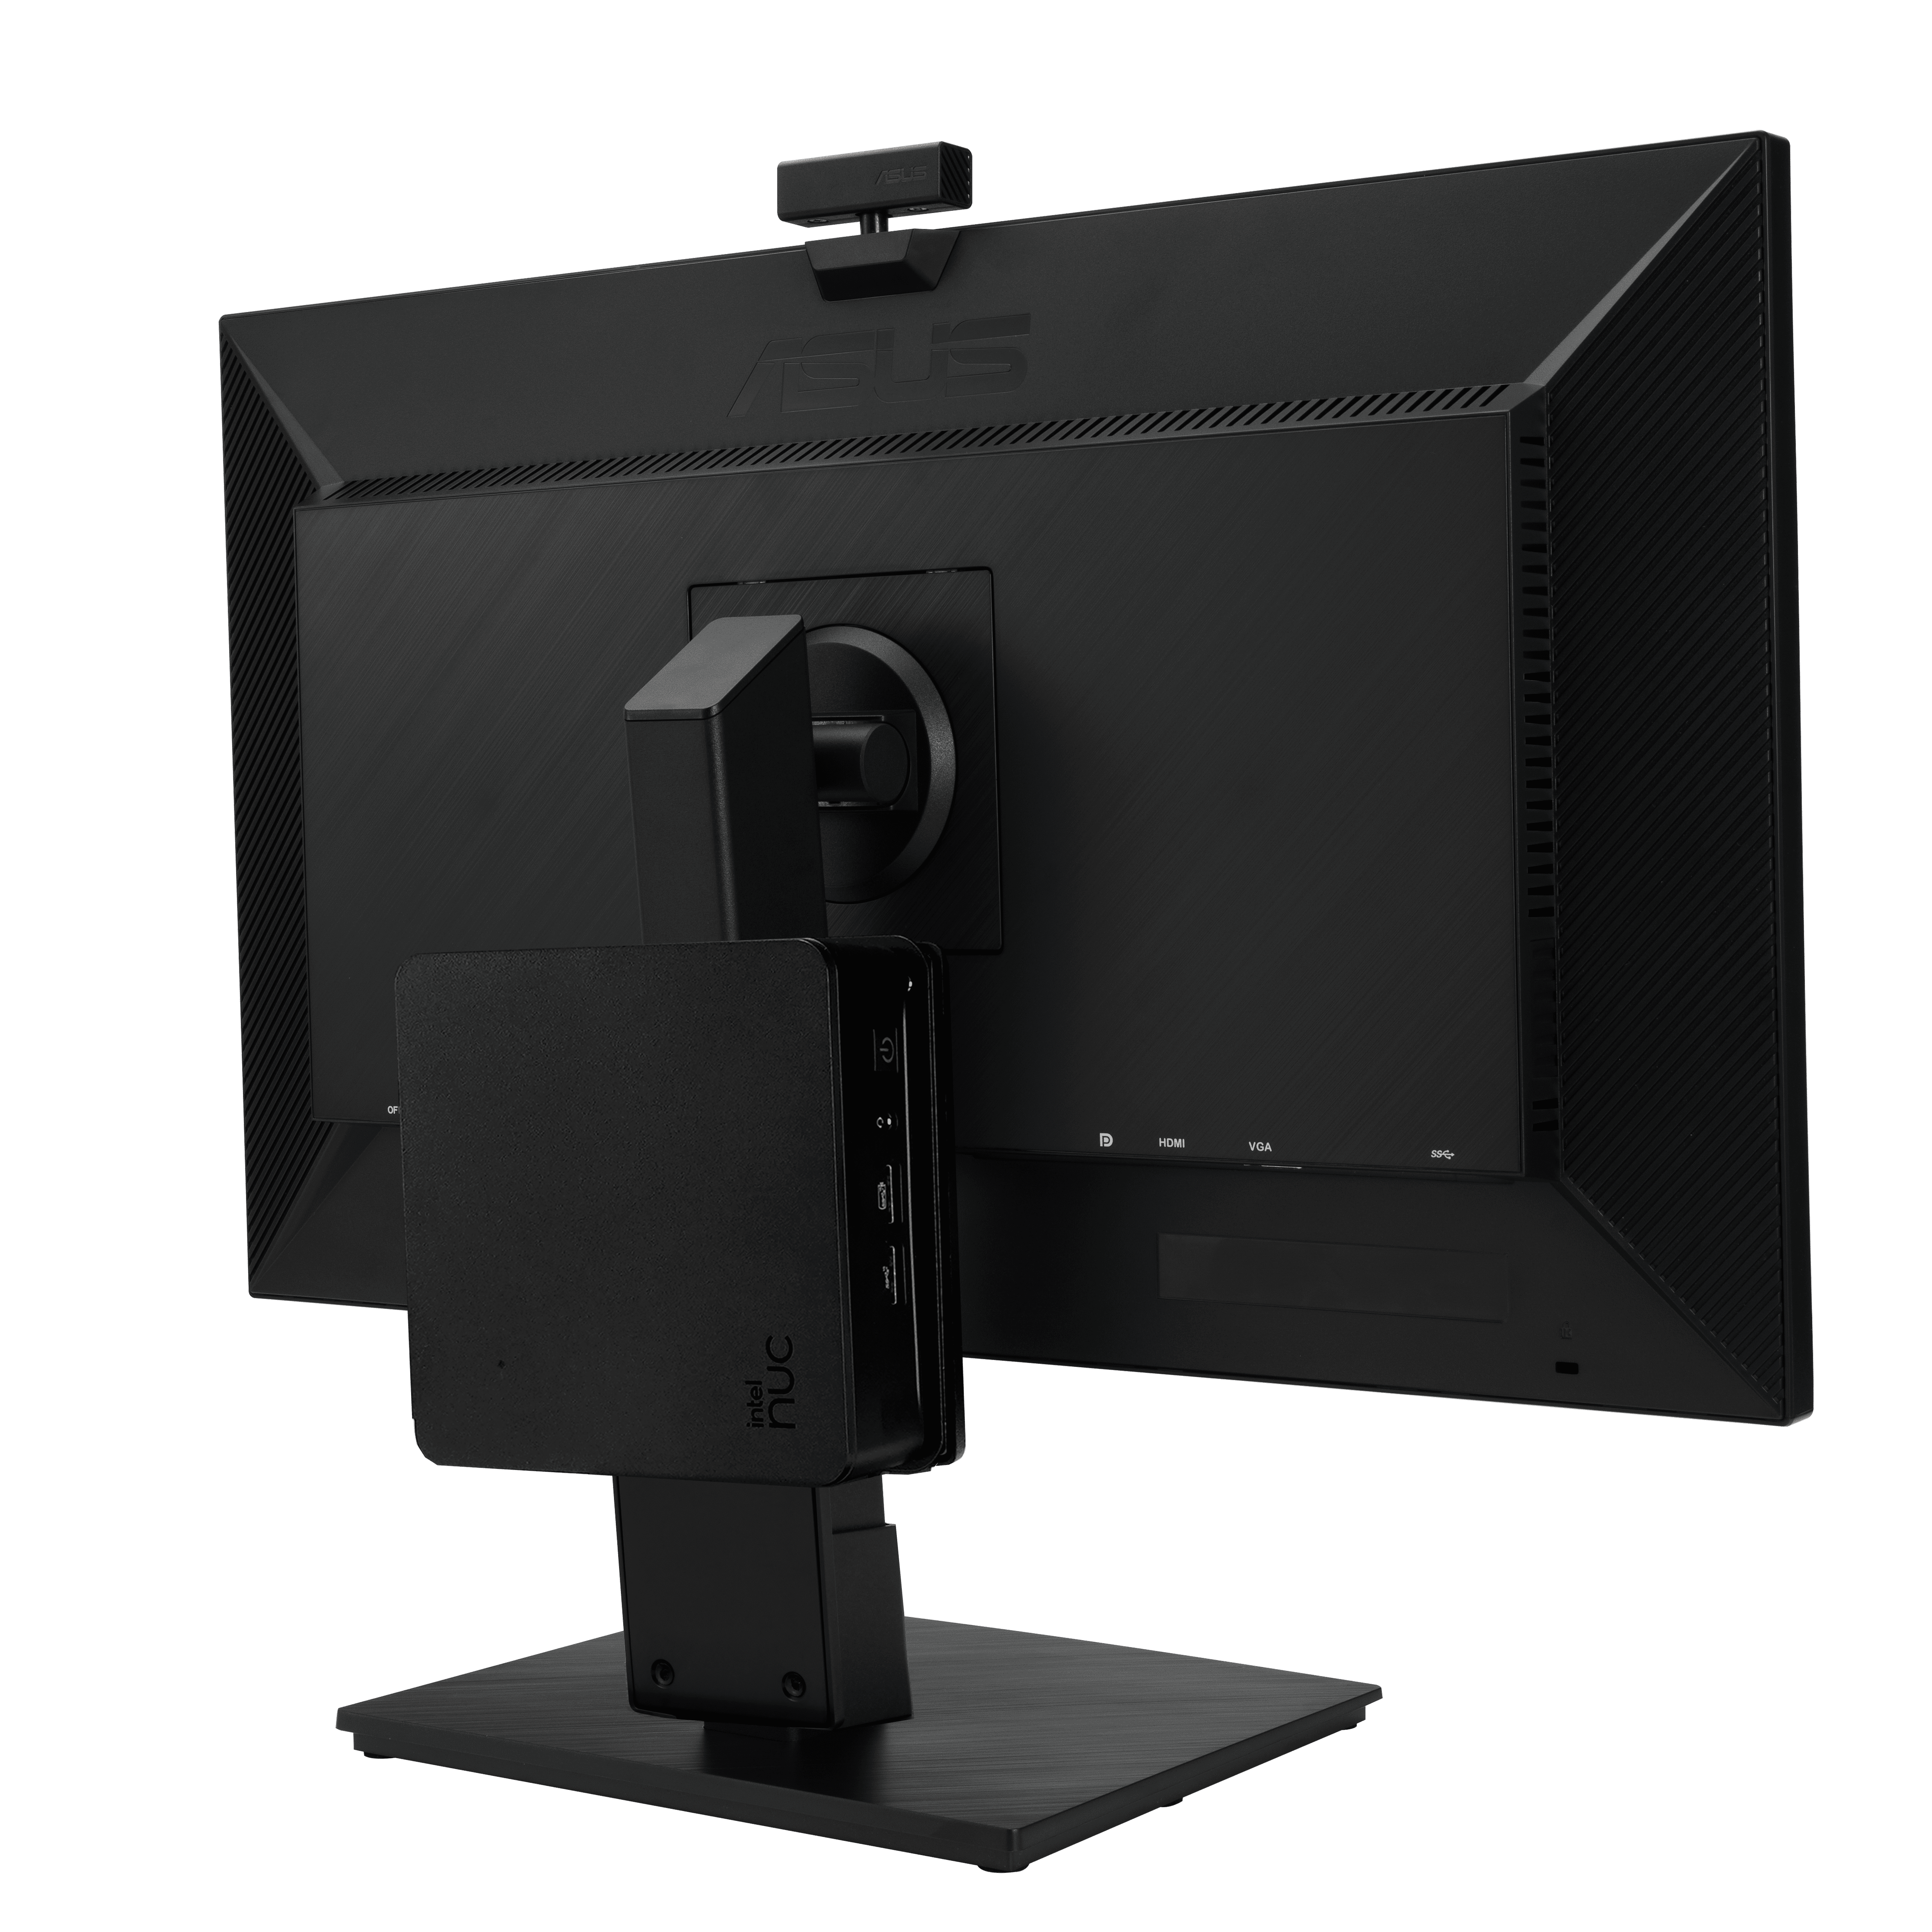 BE24EQSK is VESA-mountable, so it's easy to hang it on a wall or post.